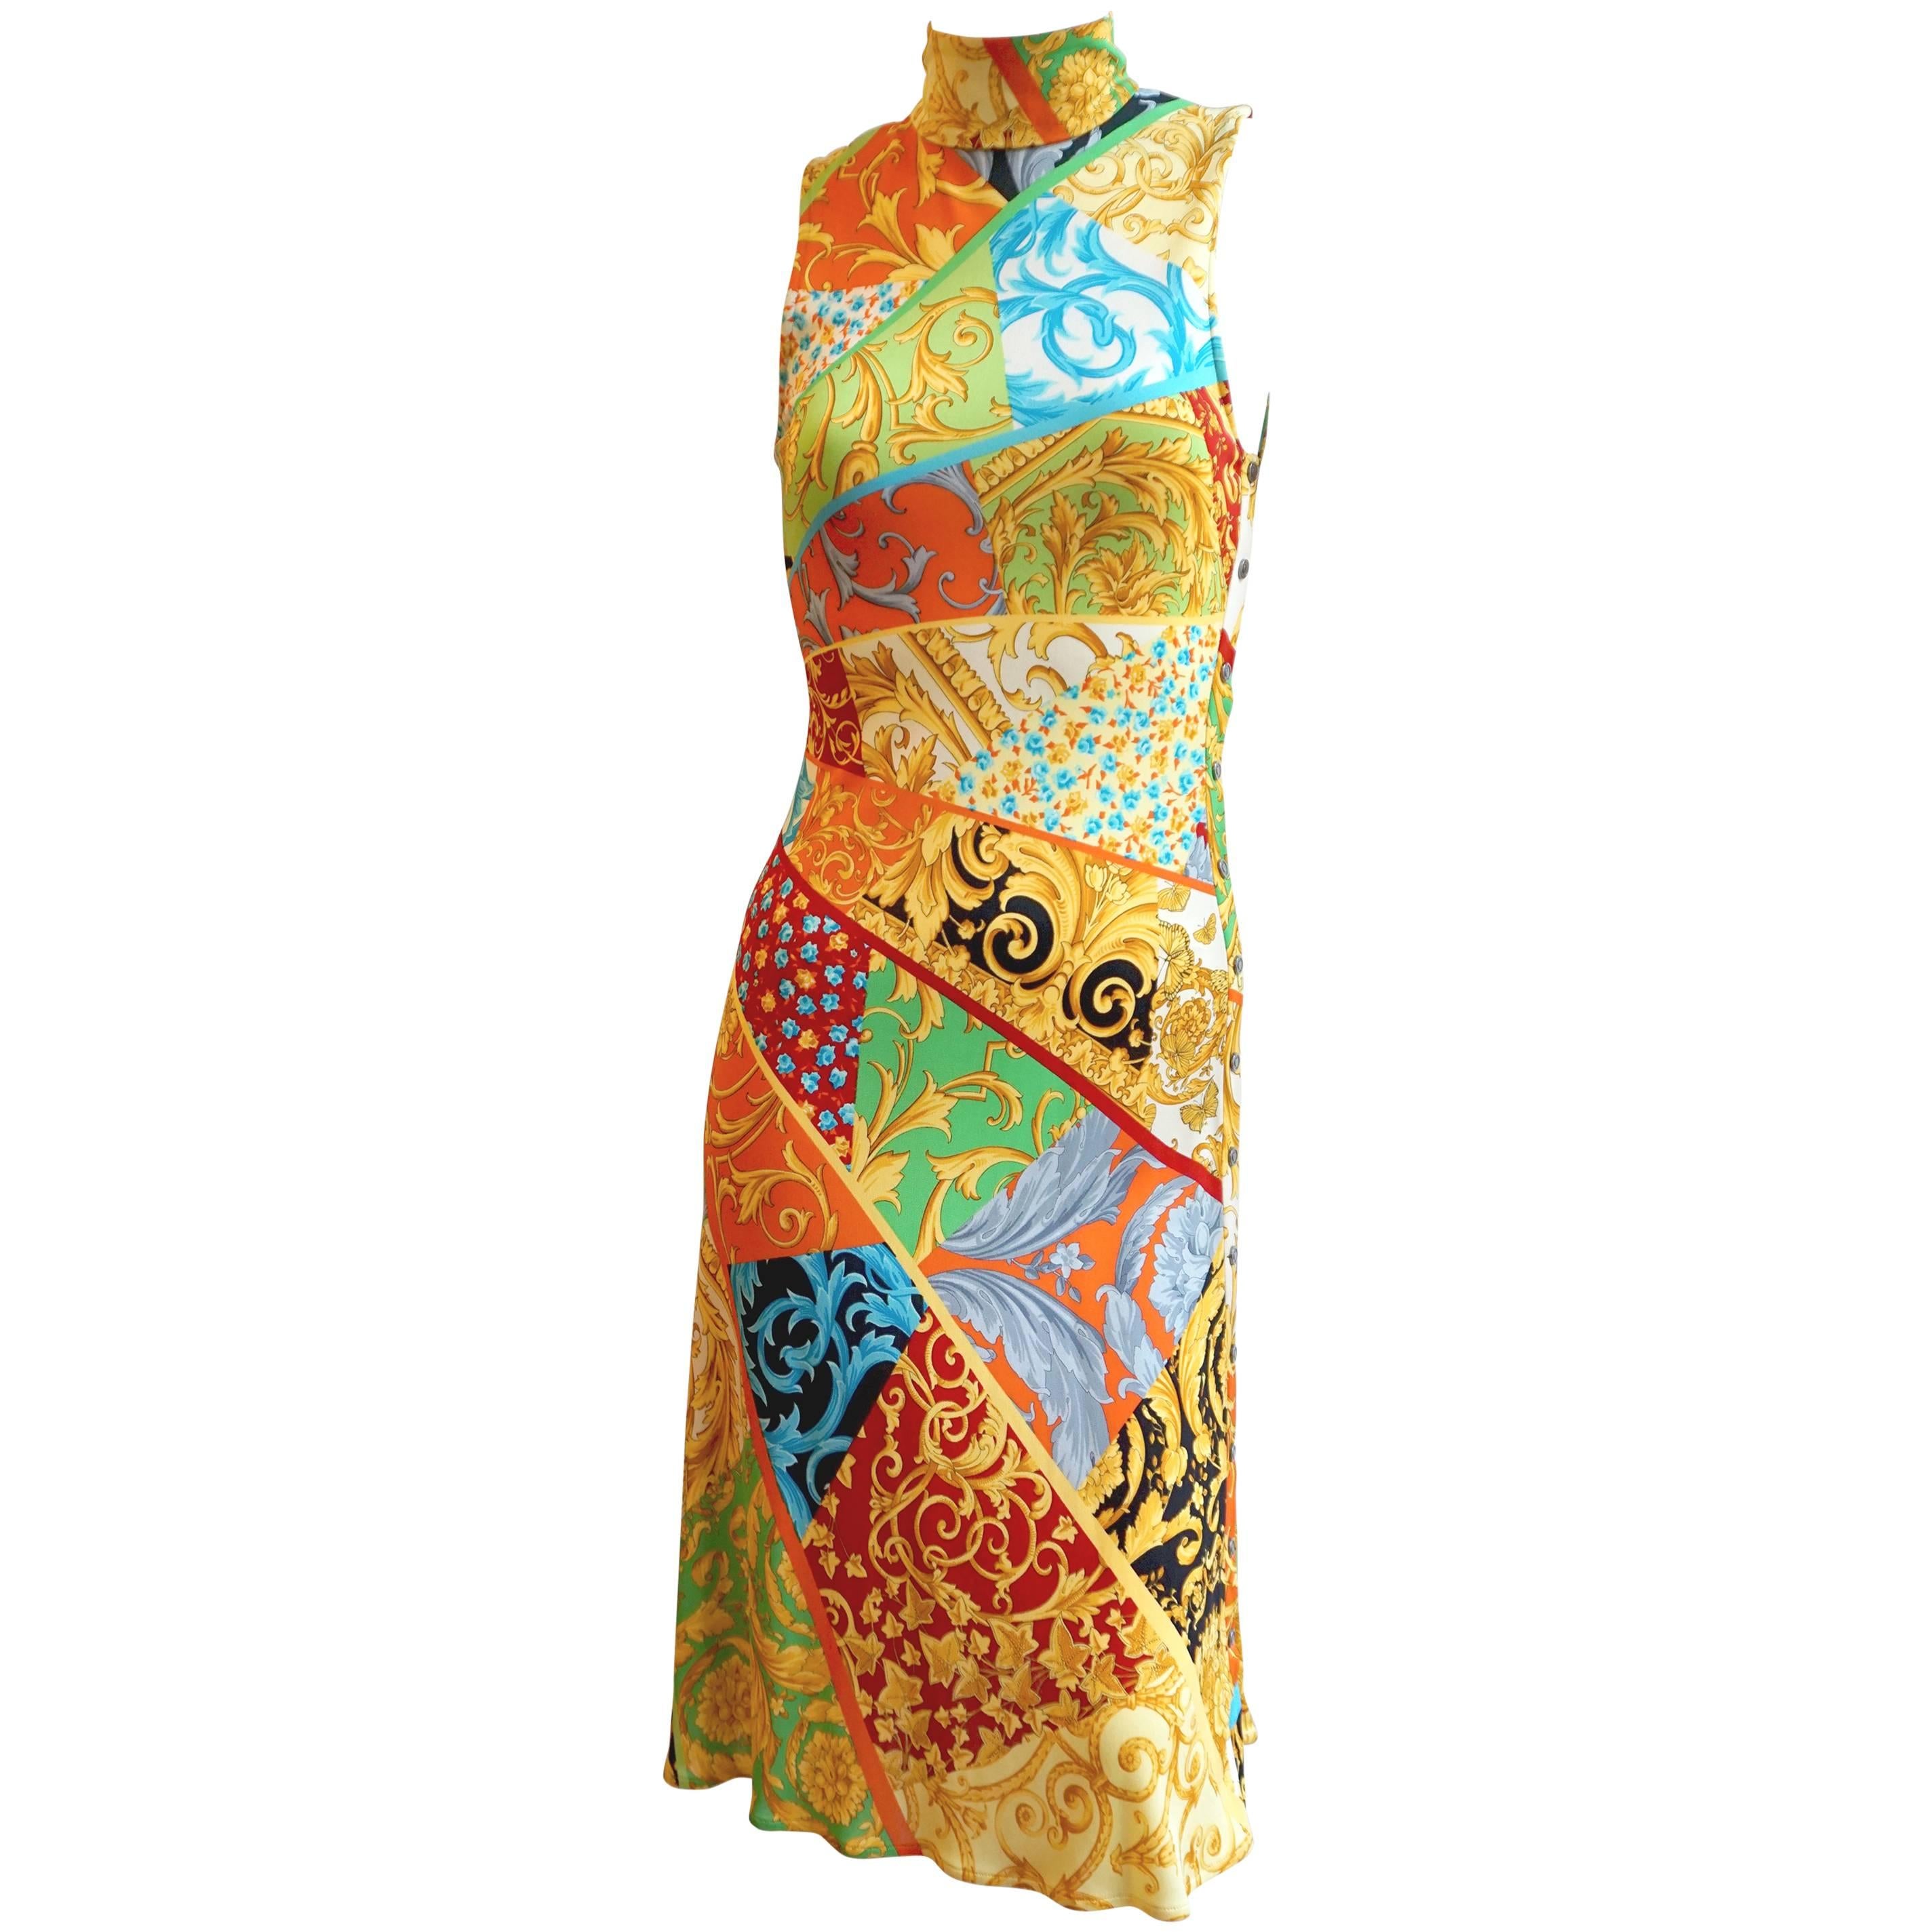 GIANNI VERSACE Print Jersey Dress with Side Snap Detail